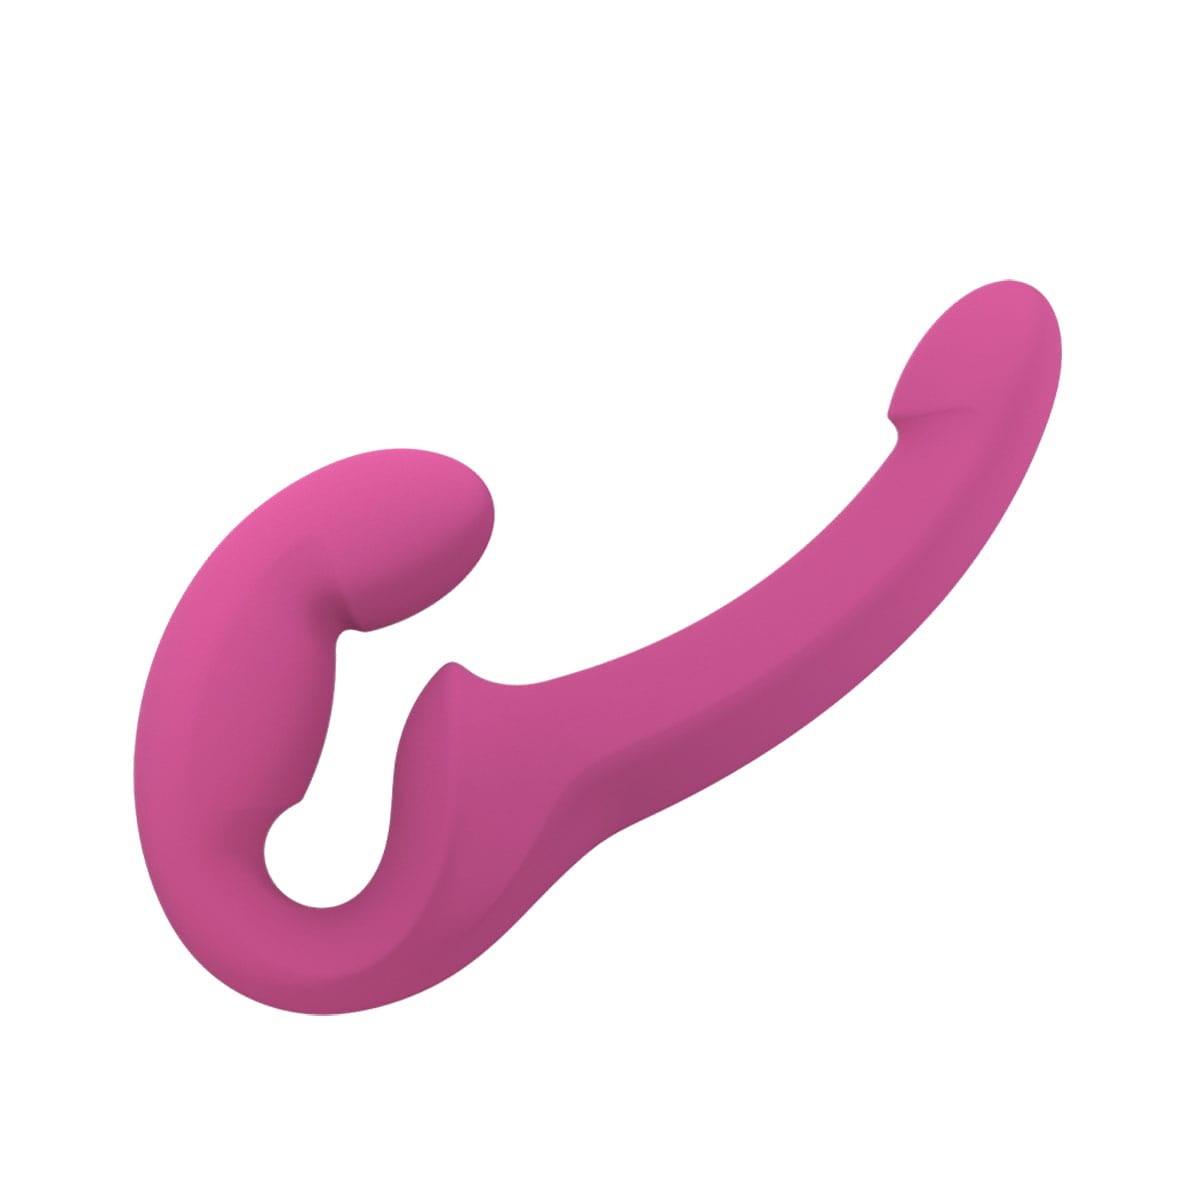 Buy Fun Factory Share Lite   Blackberry  long and 1.59 thick dildo made by Fun Factory.